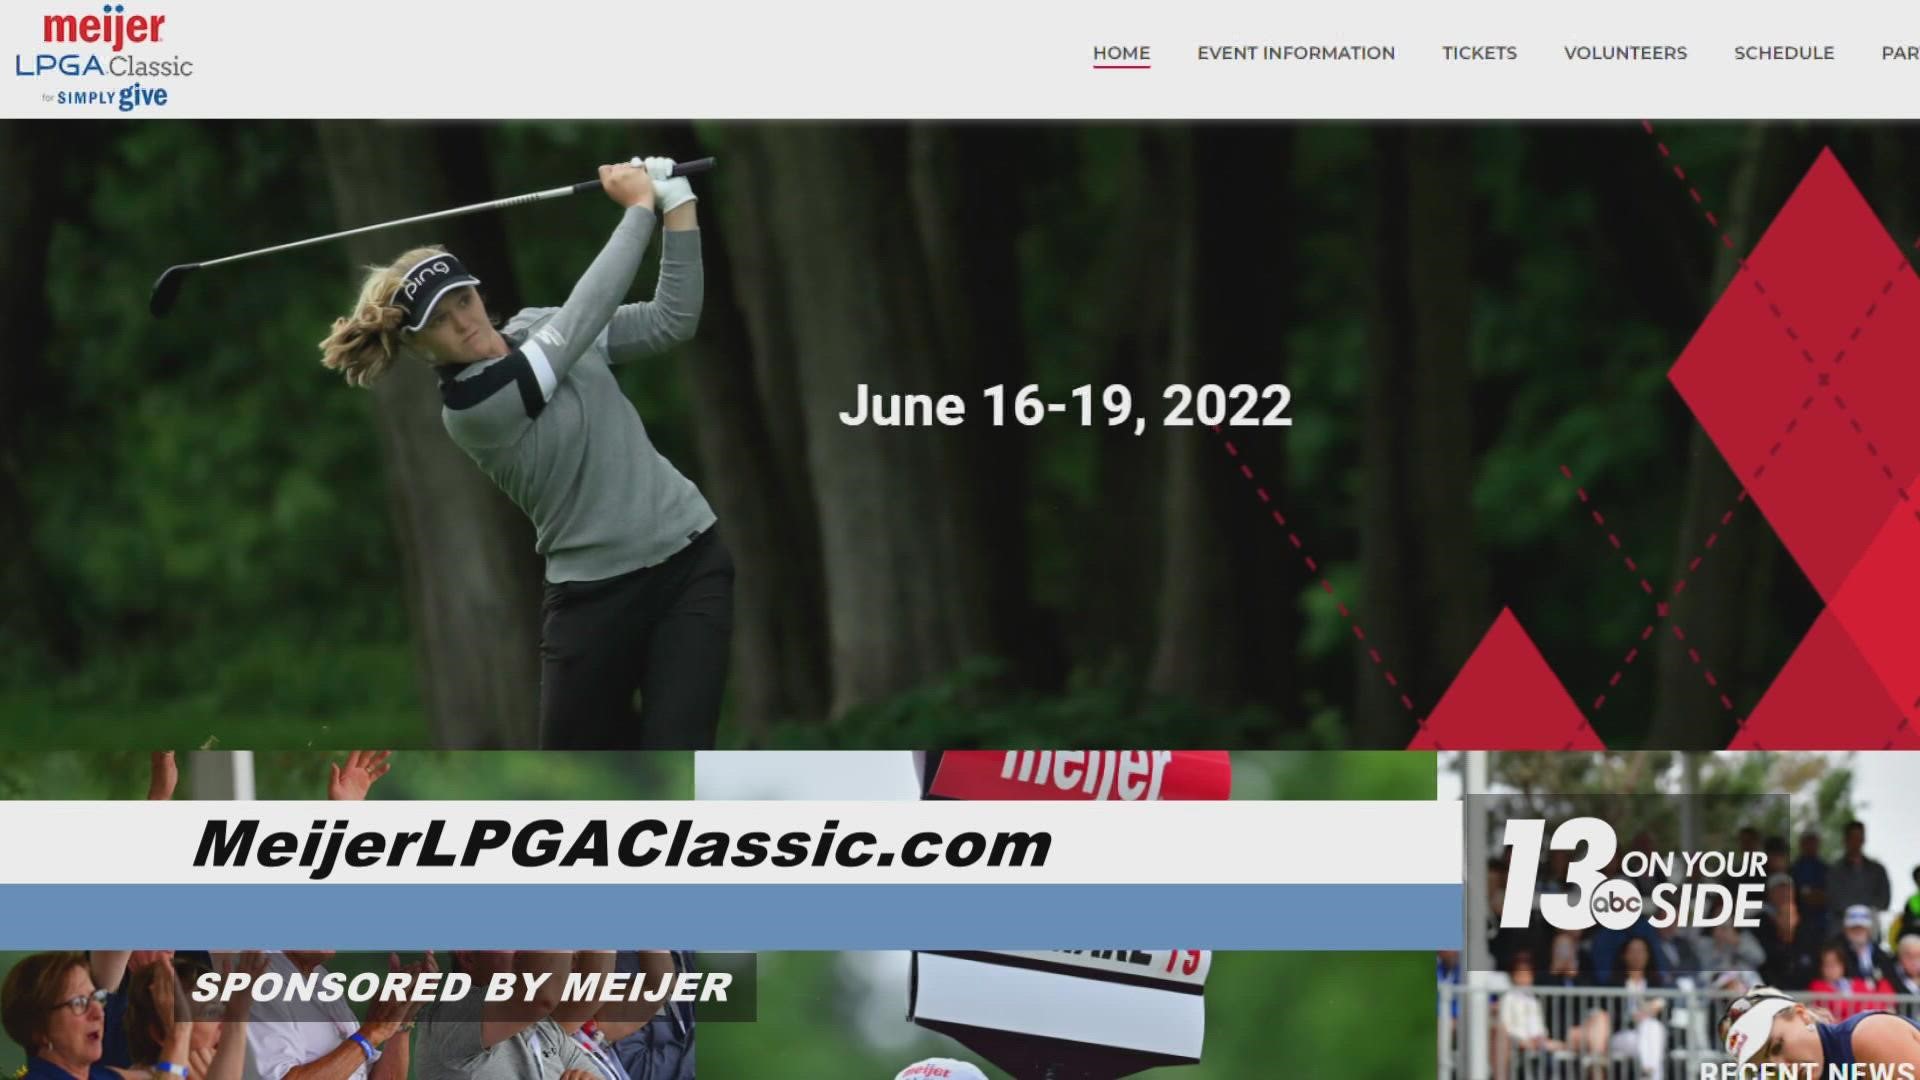 The Meijer LPGA Classic for Simply Give runs June 16-19 at Blythefield Country Club.